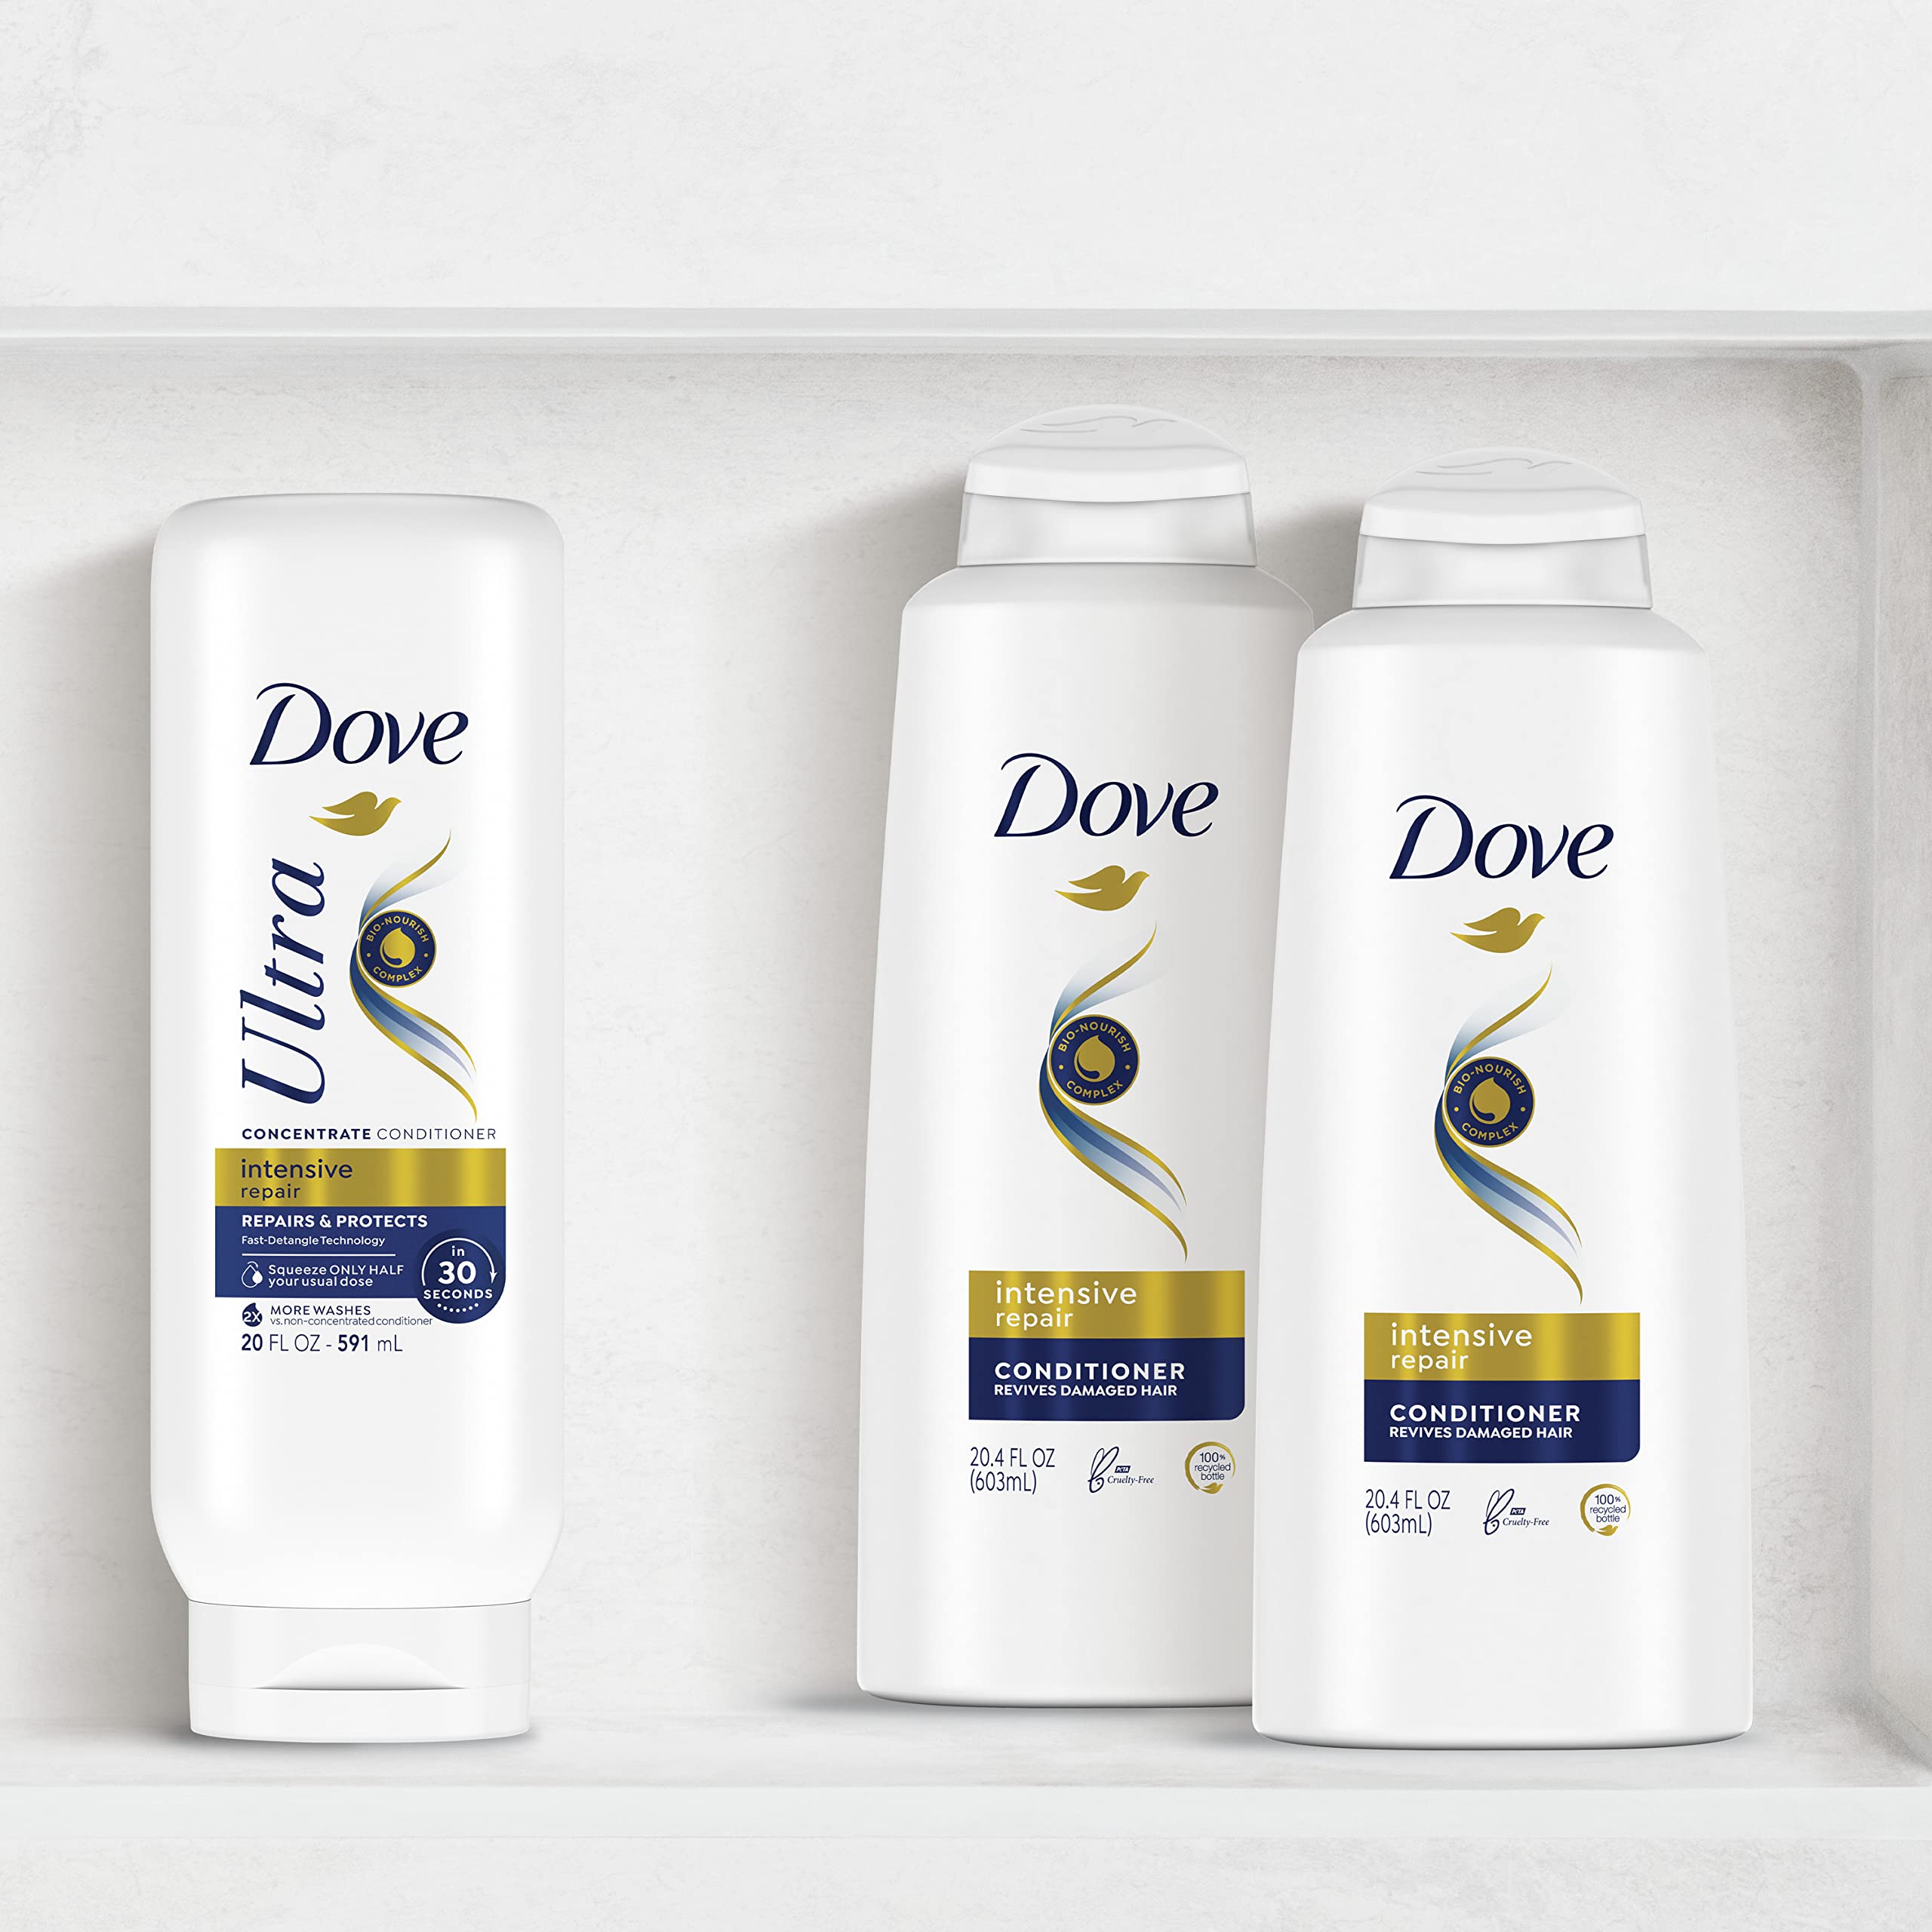 Dove Ultra Intensive Repair Concentrate Conditioner for Damaged Hair Fast Detangle Technology Repairs and Protects in 30 Seconds with 2X More Washes 20 oz